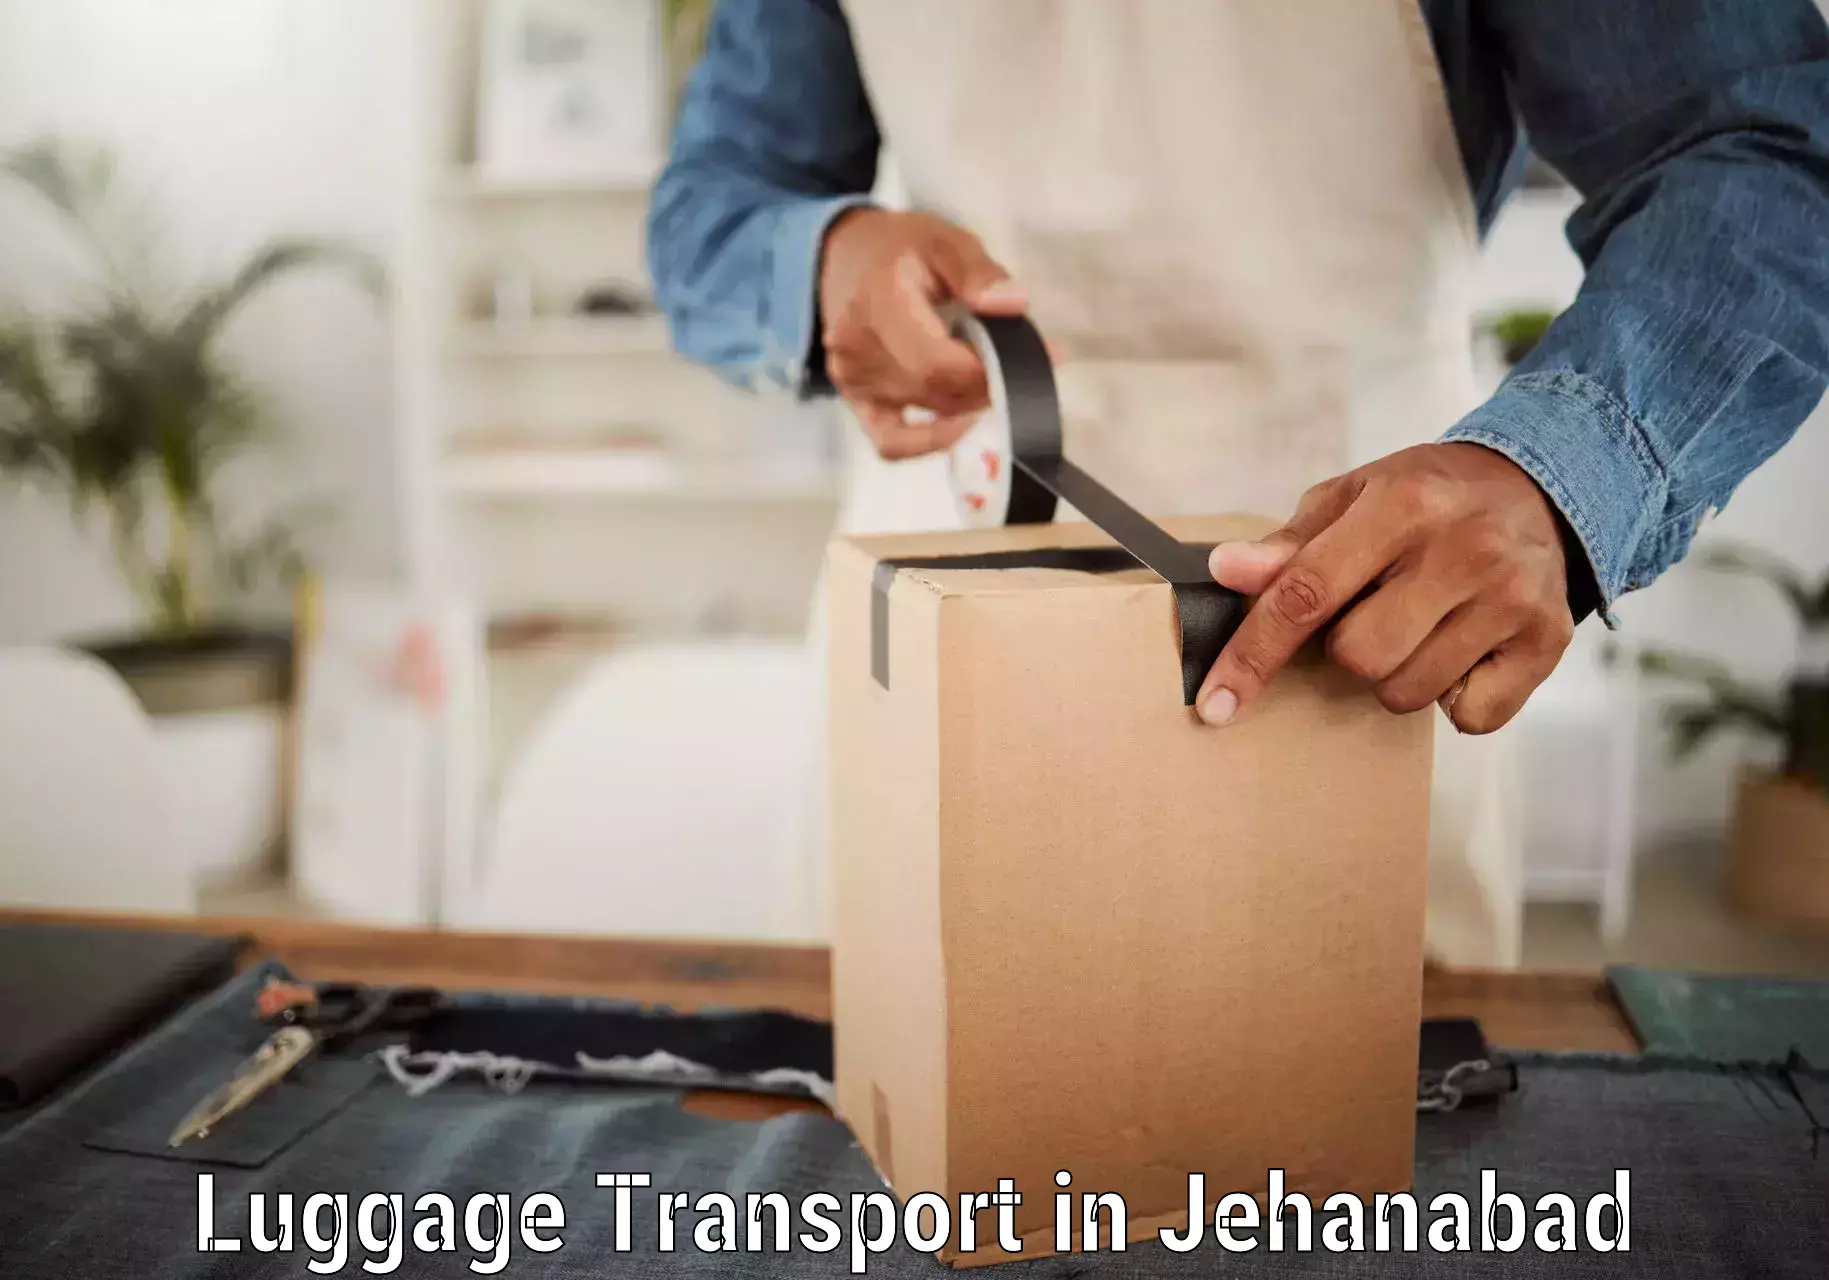 Student luggage transport in Jehanabad